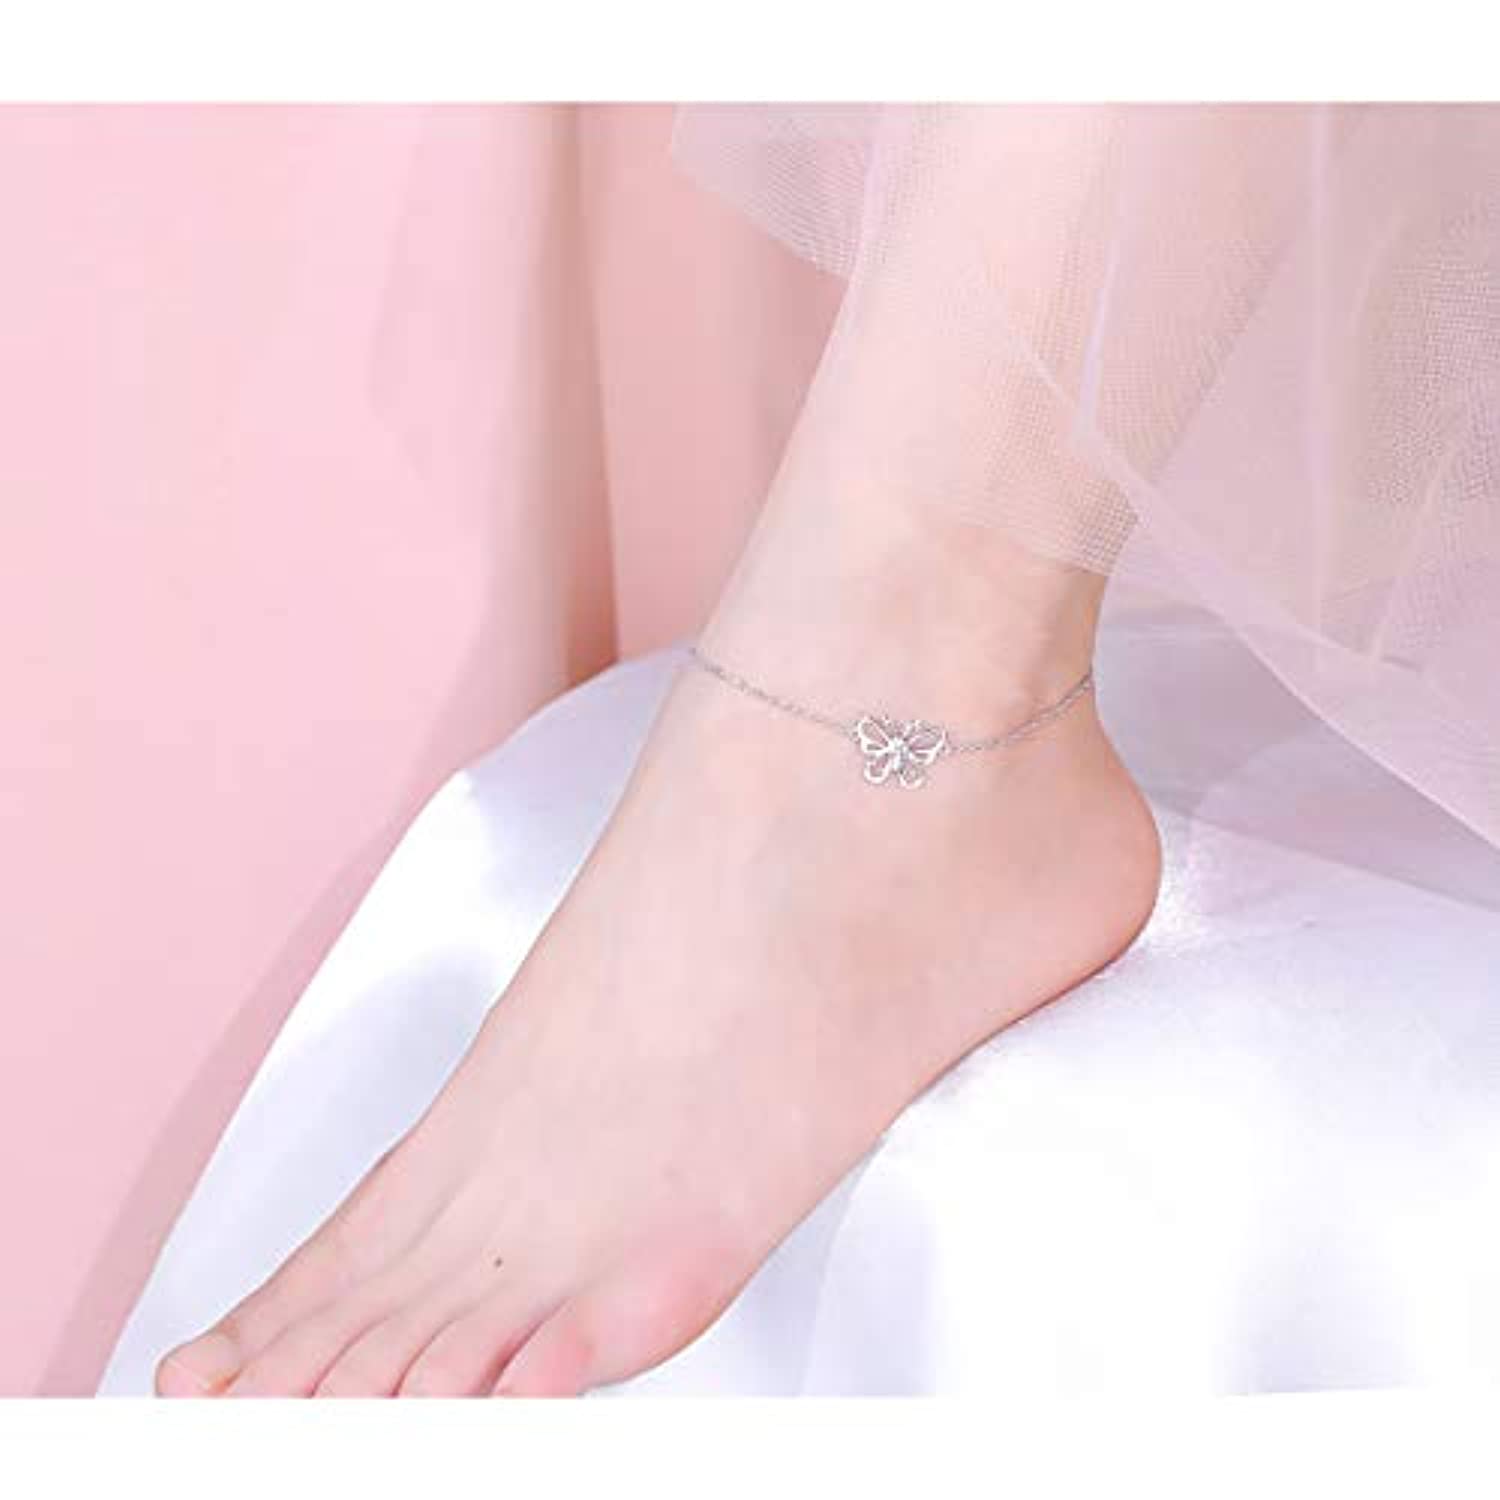 S925 Sterling Silver Anklet For Women Girl Boho Beach Charm Adjustable Foot Anklet Jewelry Birthday Gift